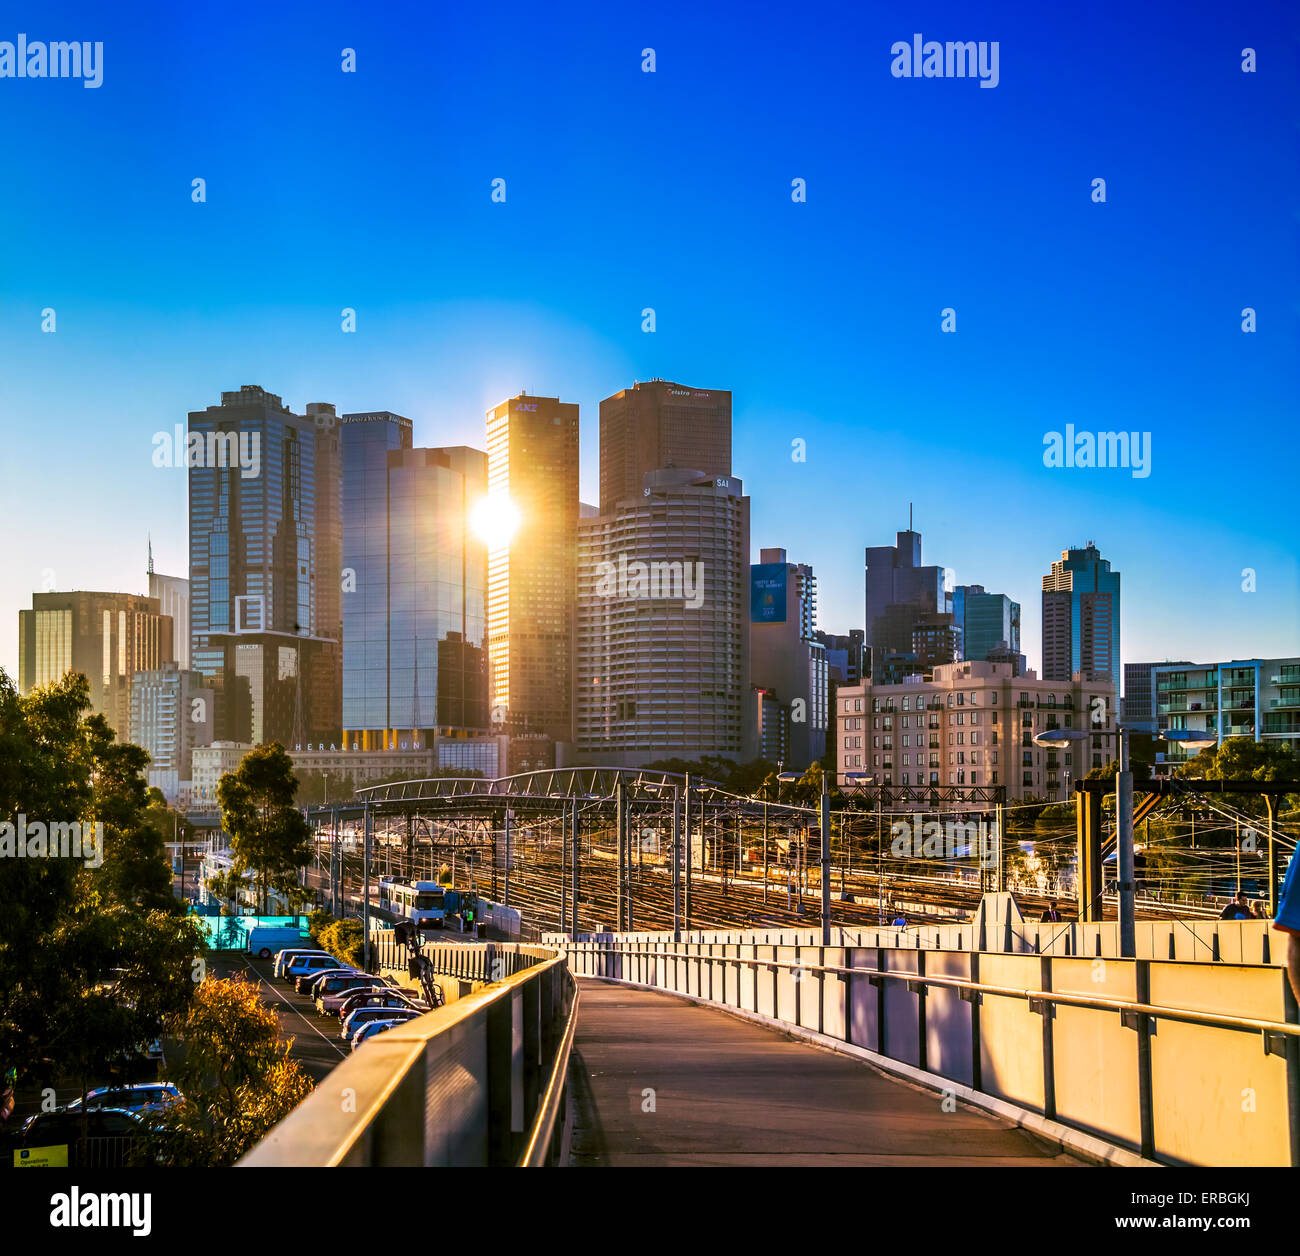 Walkway leading down to Richmond Railway station, with city skyscrapers at sunset Melbourne, Australia Stock Photo